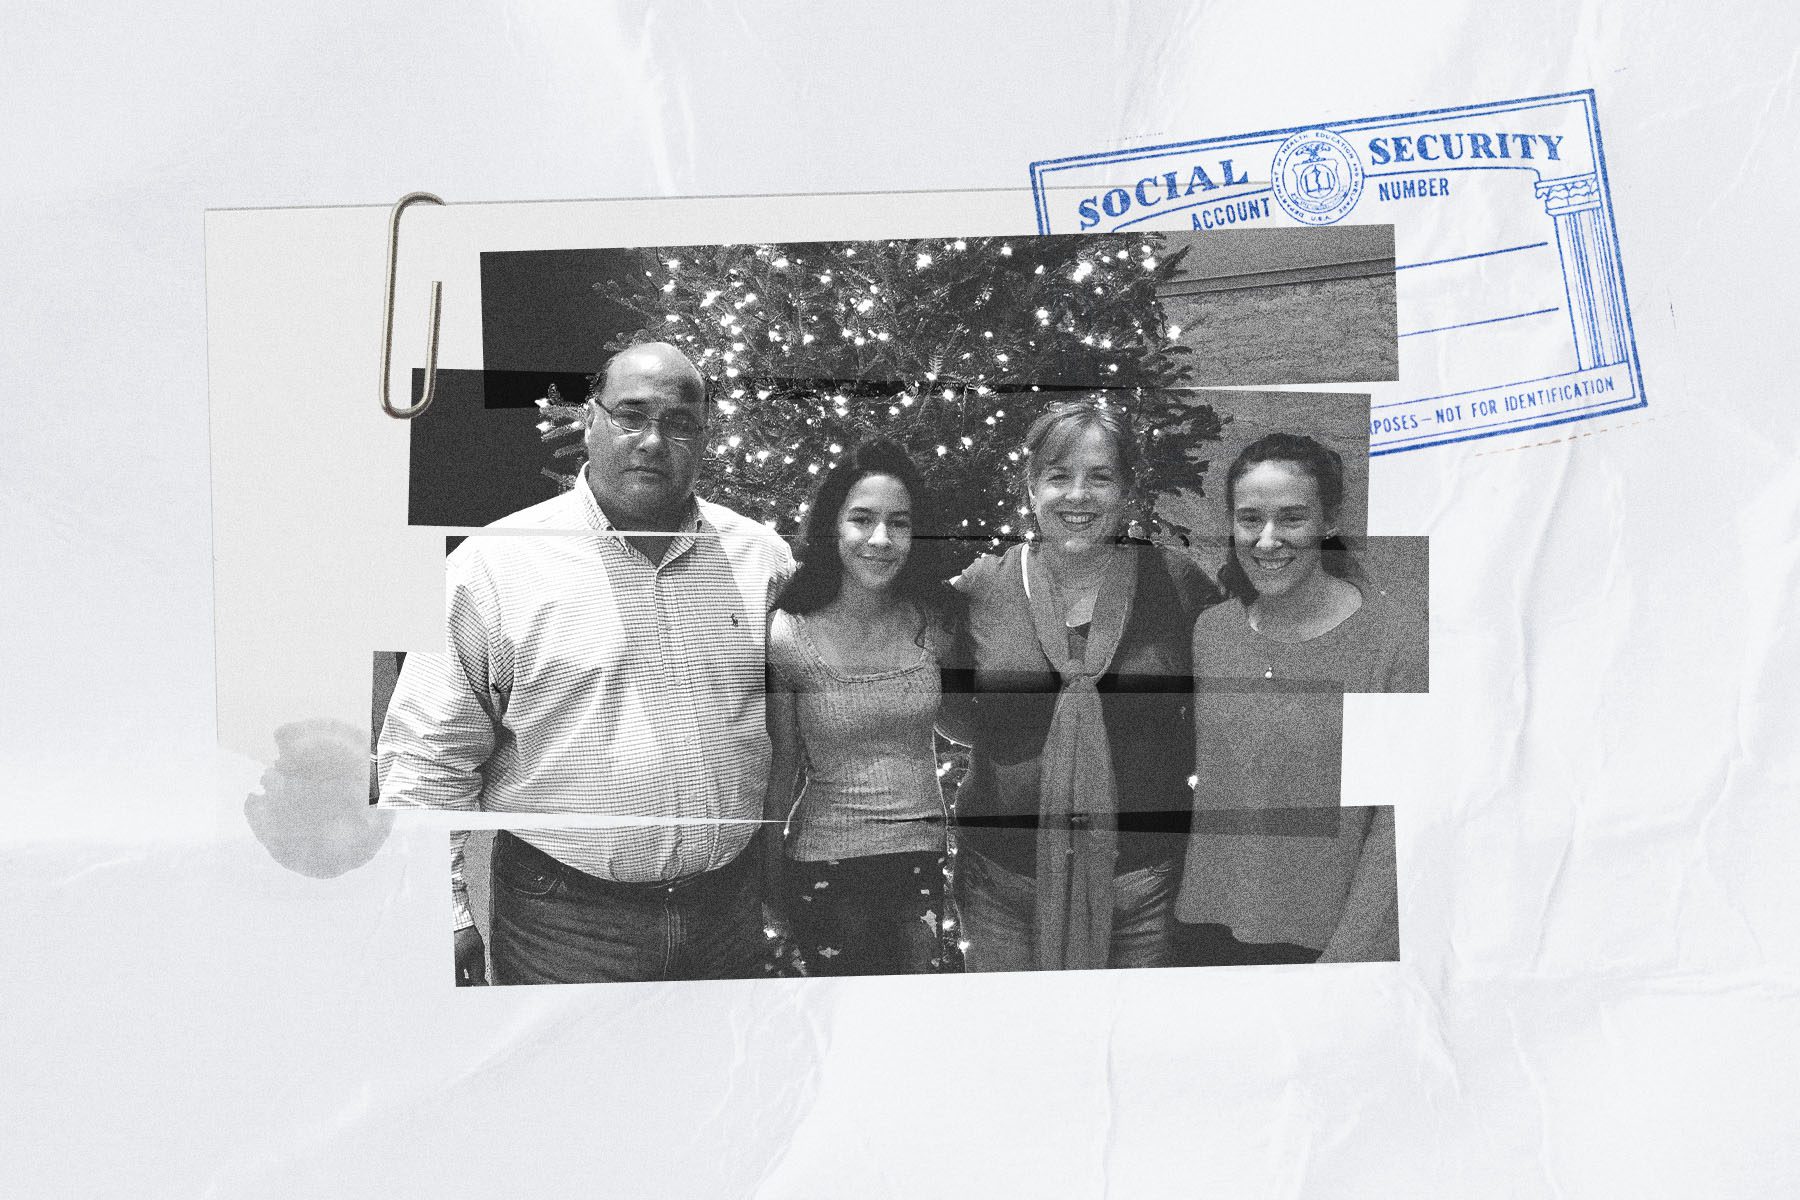 A photo illustration of a family standing in front of a Christmas tree, with Social Security information behind them.